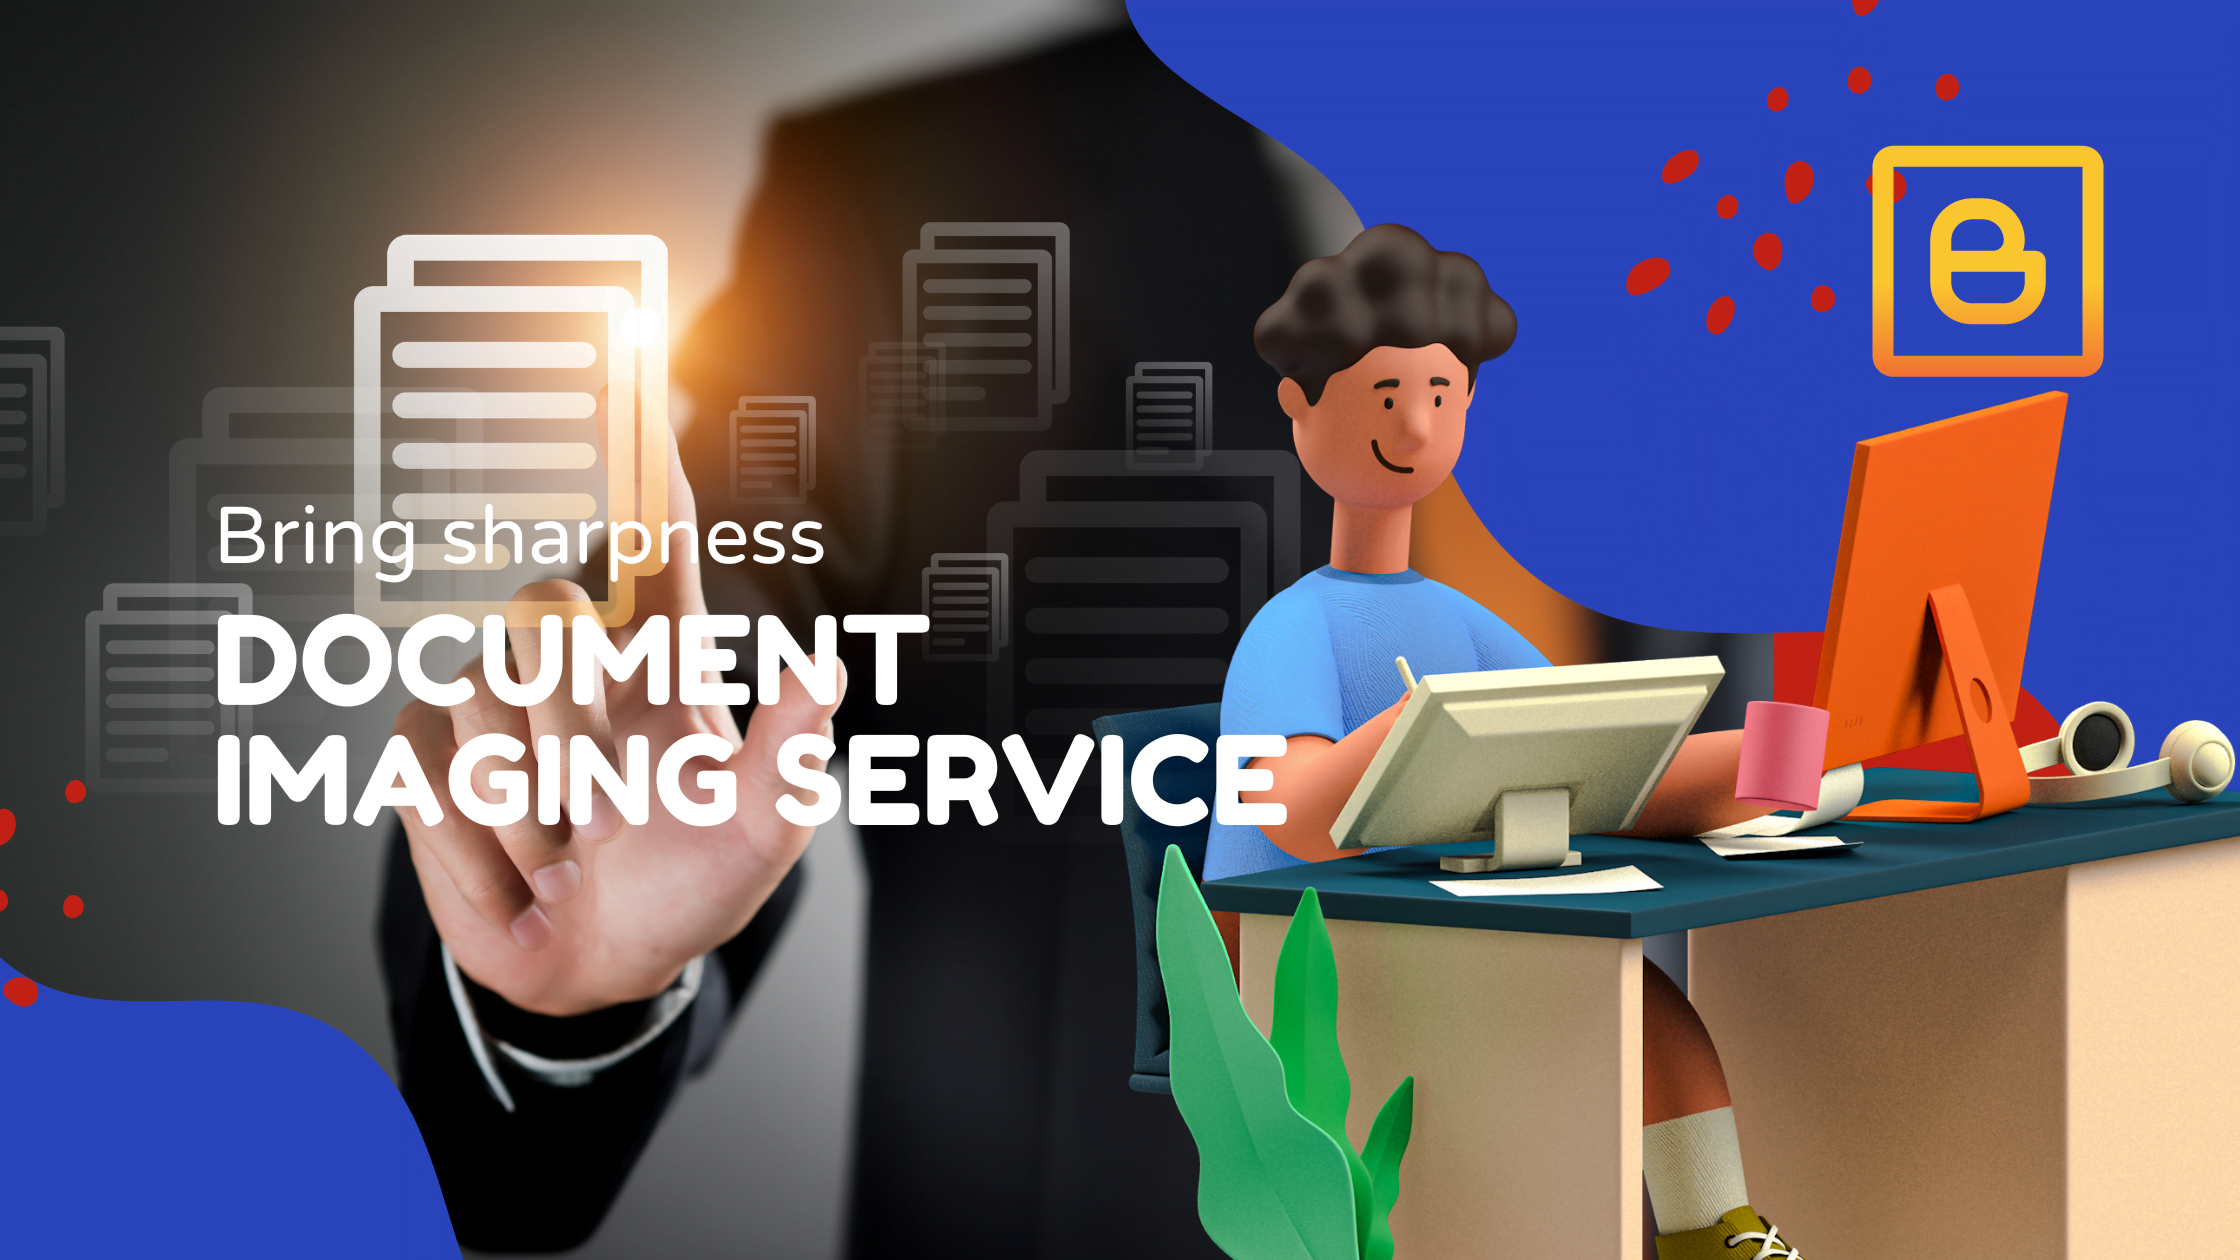 Bring sharpness with the help of a Document imaging service